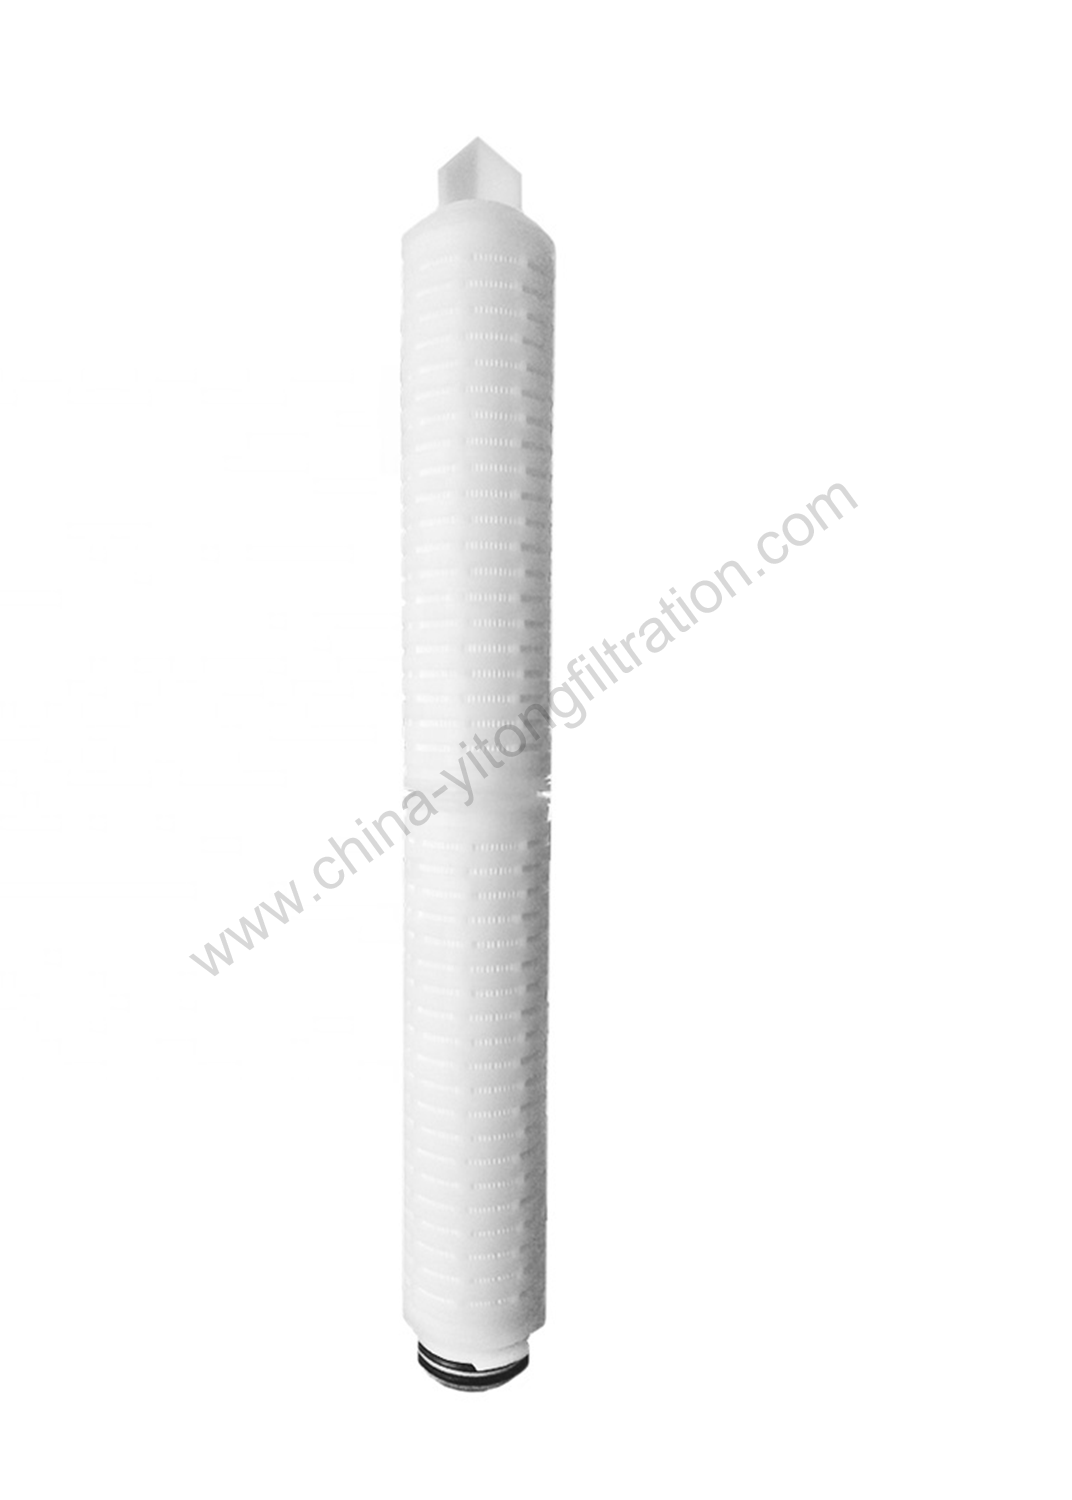 PES Pleated Filter Cartridge